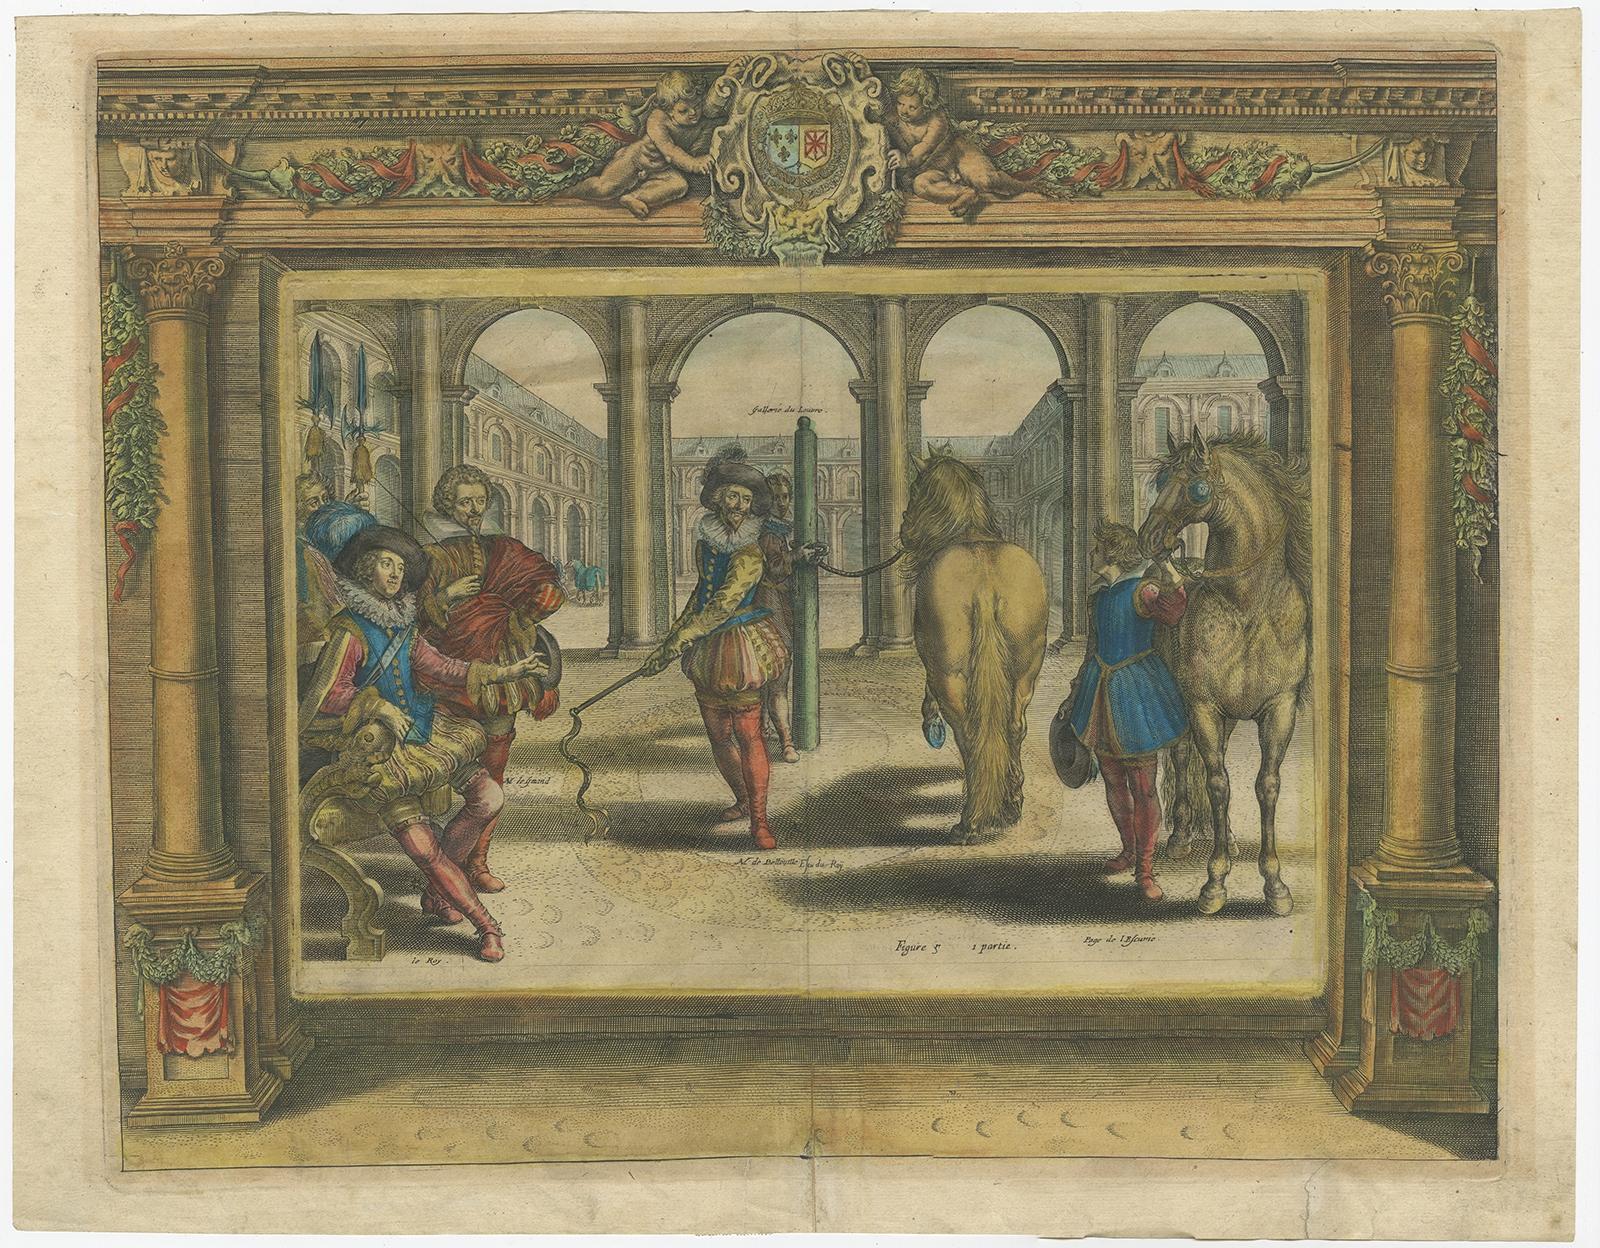 Antique print depicting two horses near the Louvre, France. Also depicted are a group of men, including Mr. LeGrand. This print originates from 'L'Instruction du Roy en l'Exercice de Monter a Cheval', a work about the mounting of horses. 

Artists